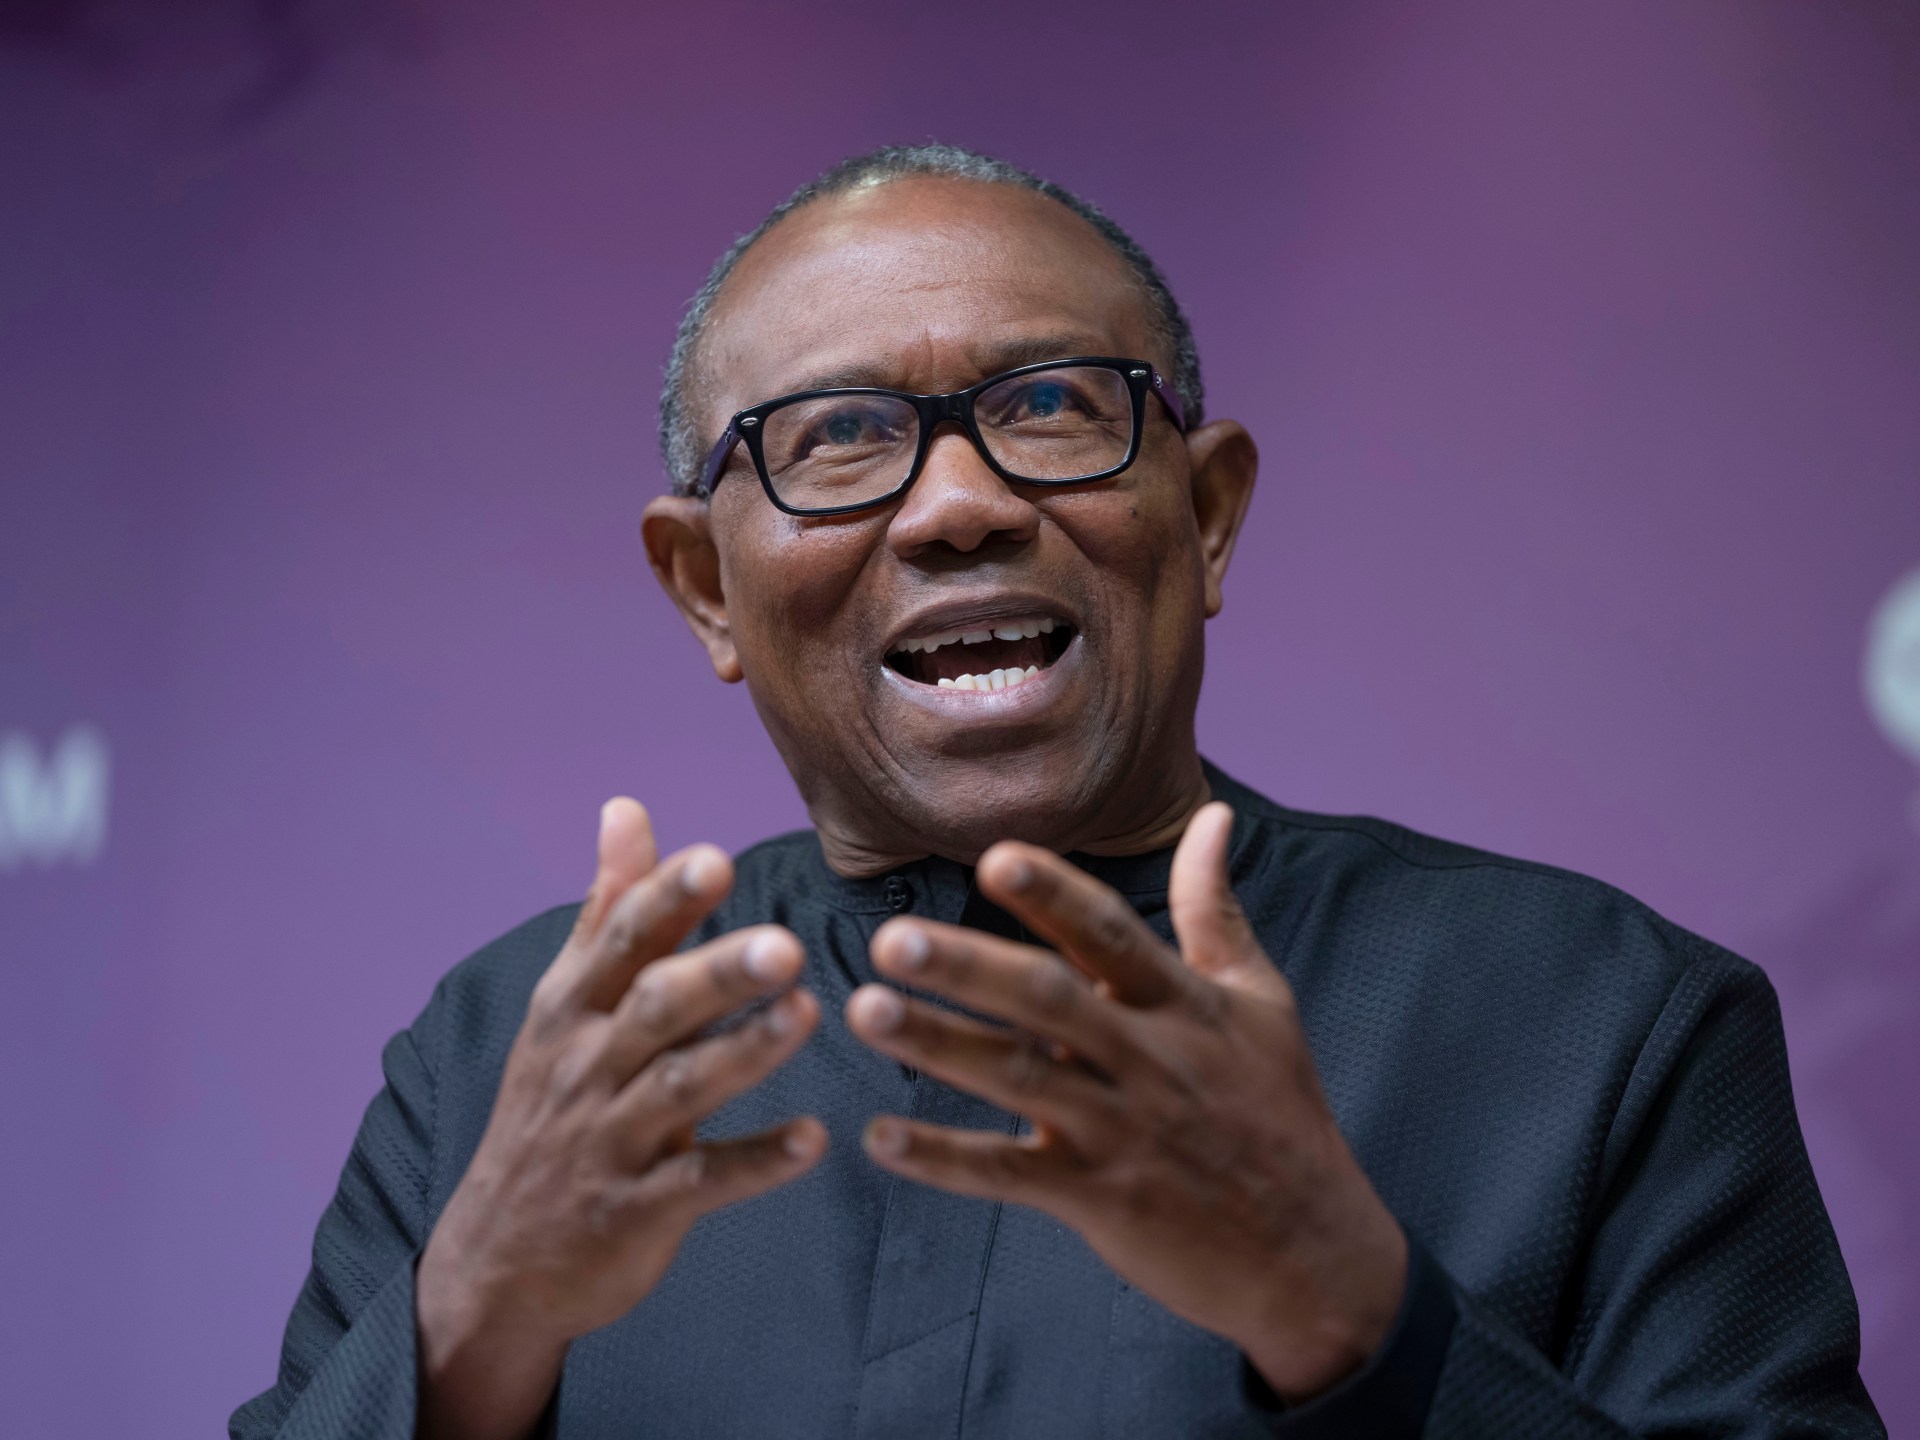 Nigeria’s Peter Obi started a movement. Can he become president?